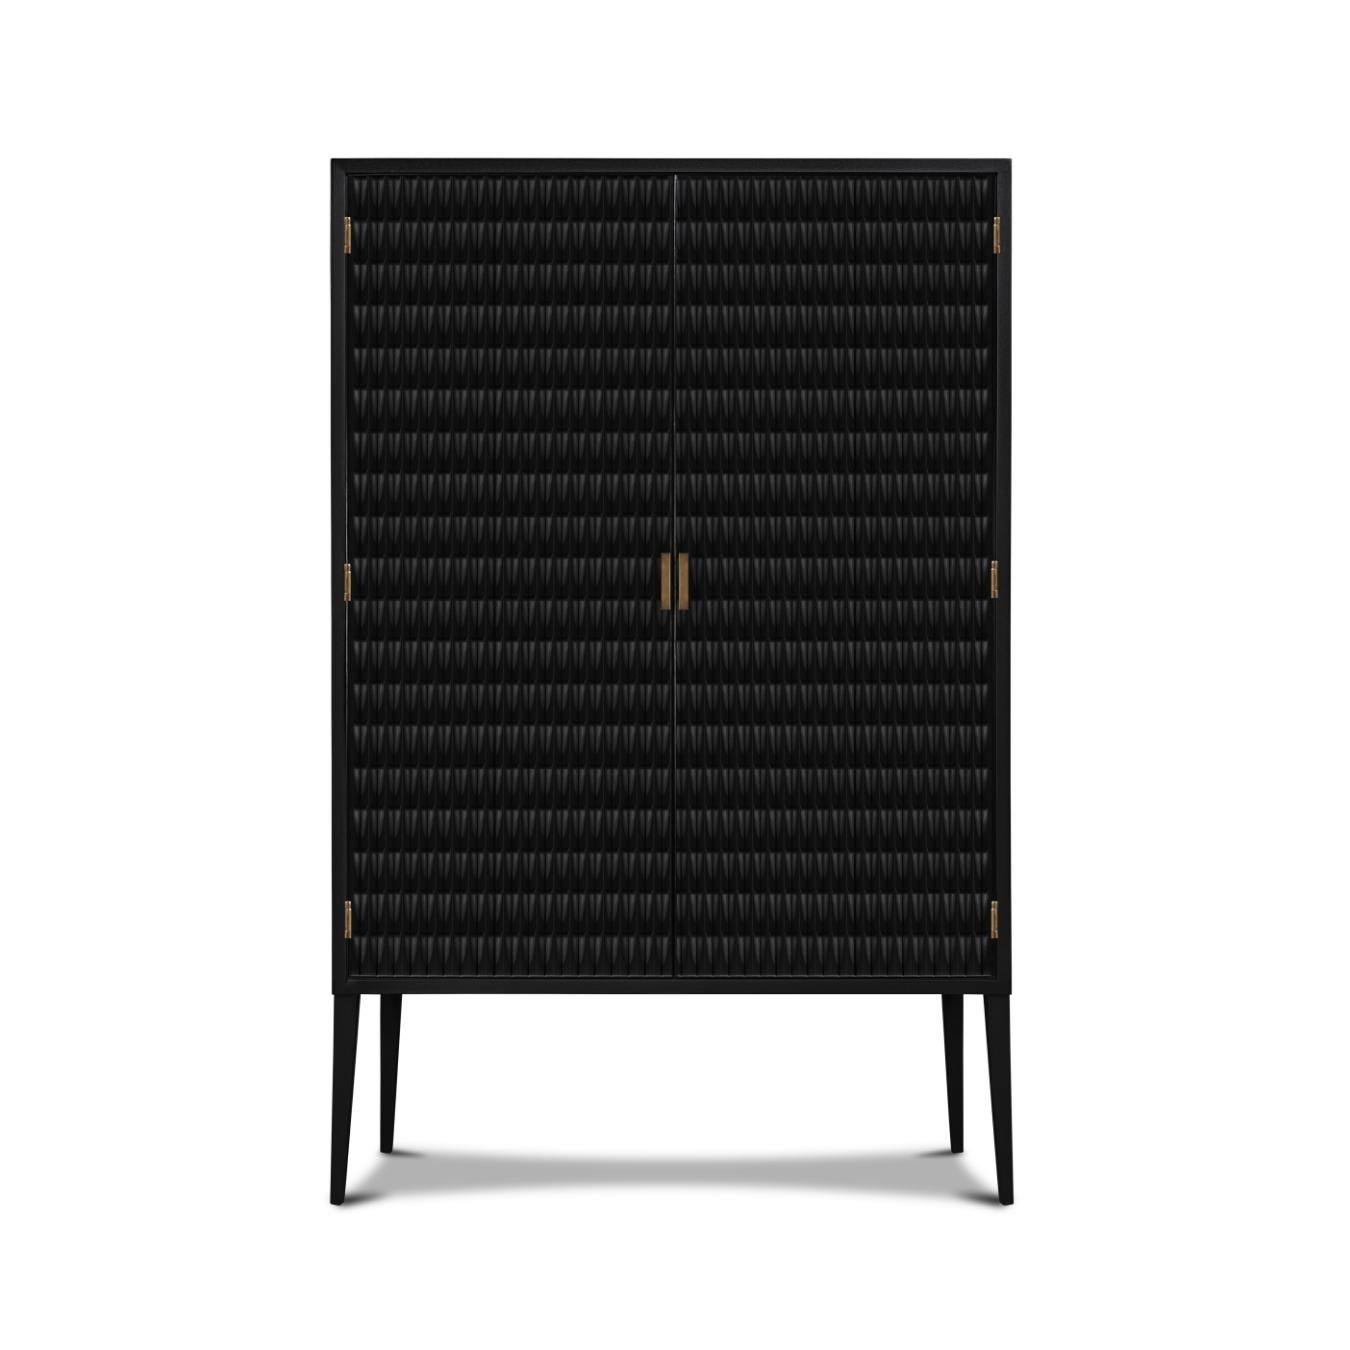 Inspired by Danish designs from the 50’s, the Vance armoire is a beautiful example of fine craftsmanship. The door’s design has an arrow-shaped texture that makes the cabinet unique. The interior is painted in red and has a simple black metal